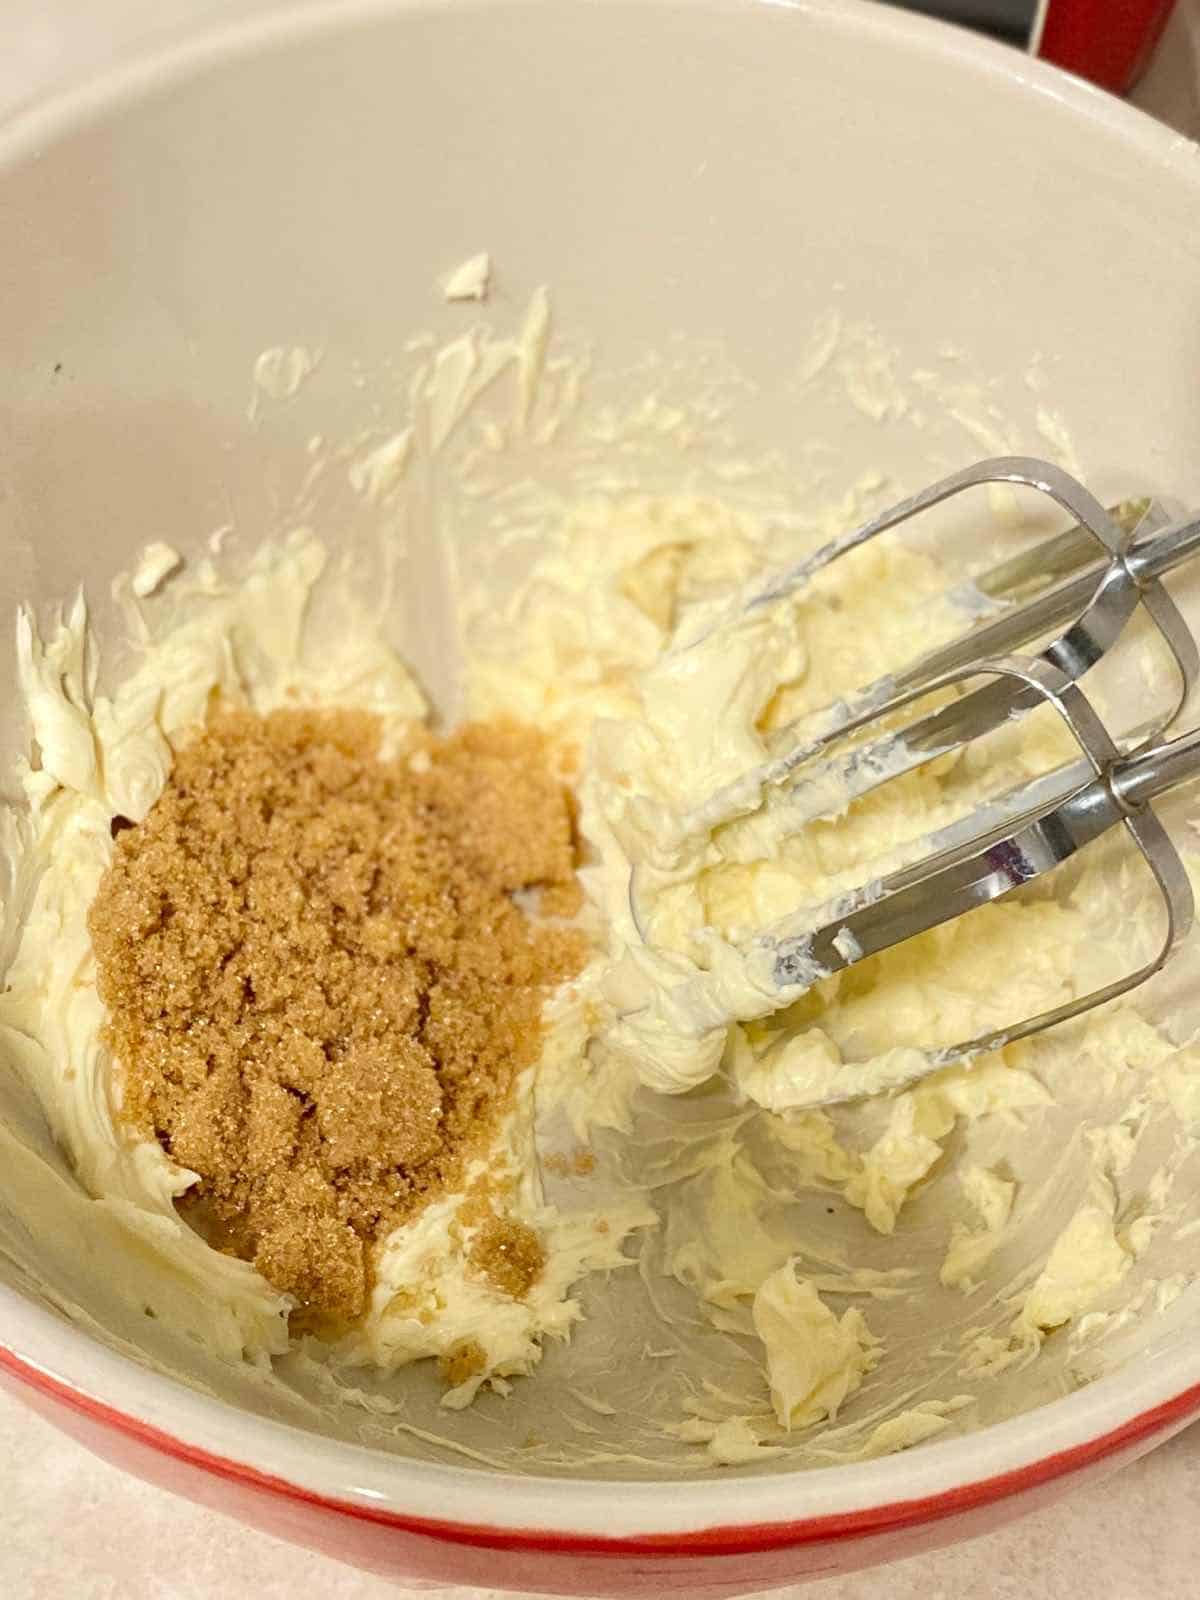 cream butter and sugar in a bowl to make filipino coconut macaroons